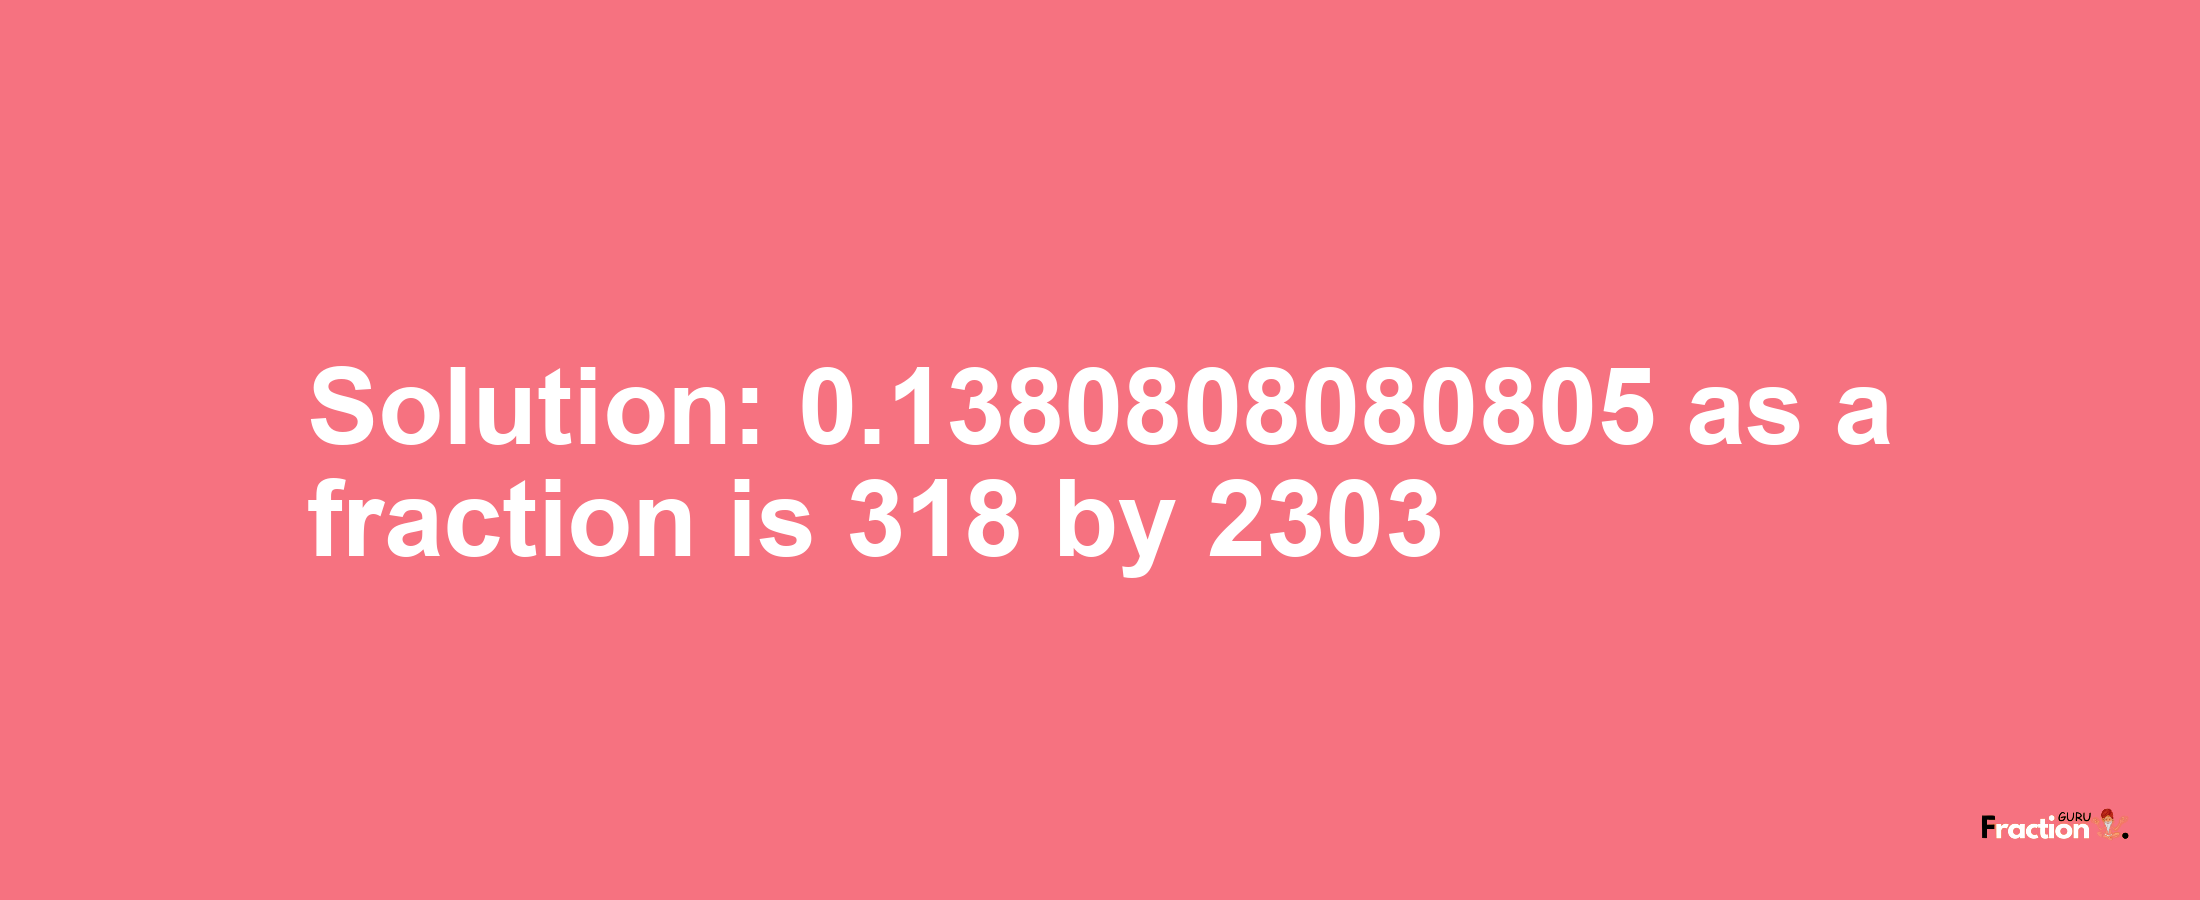 Solution:0.1380808080805 as a fraction is 318/2303